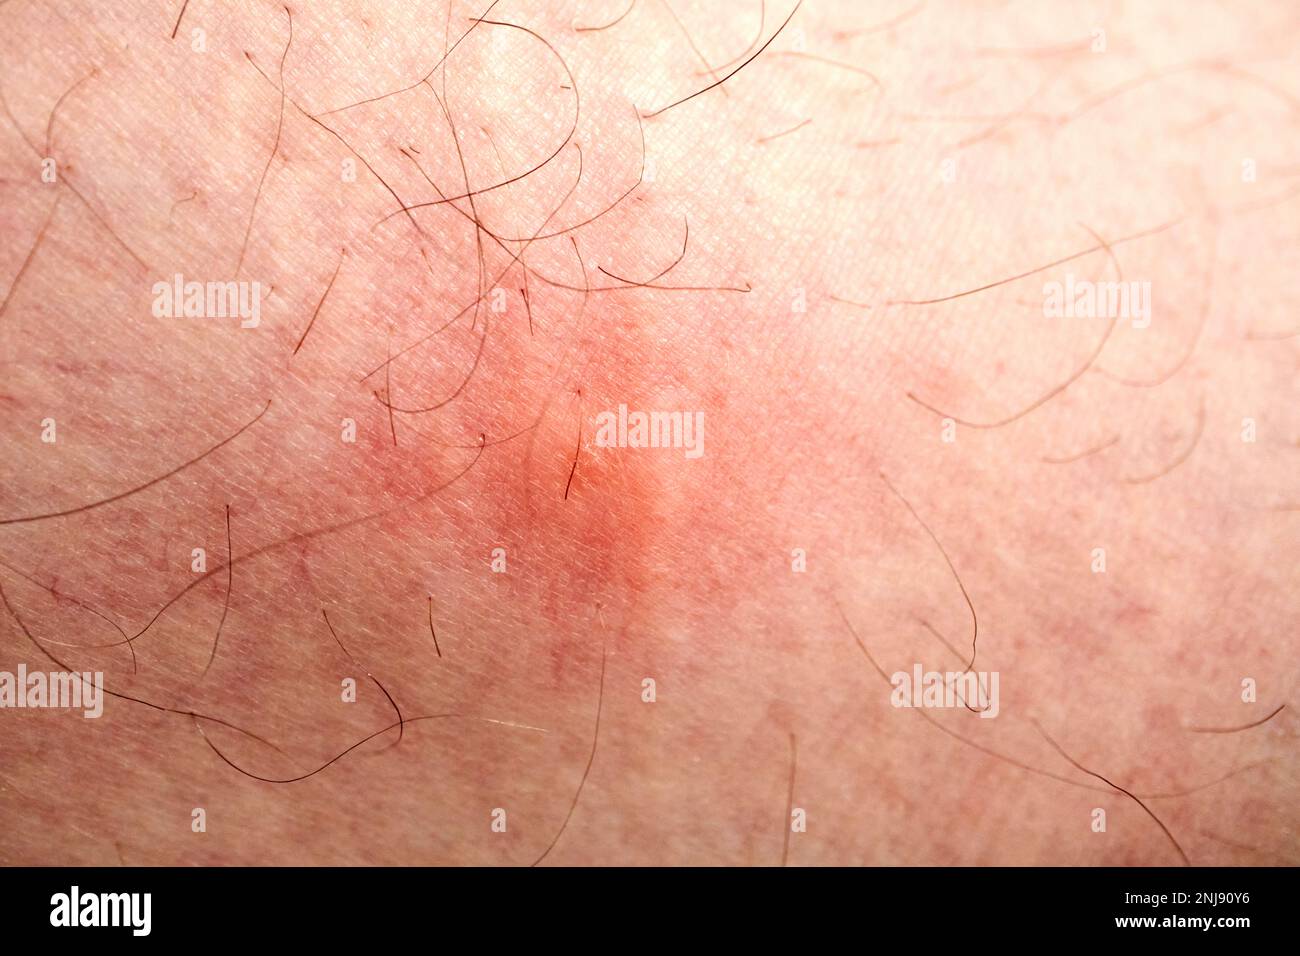 mosquito bite swollen up close up on a leg Lanzarote, Canary Islands, Spain Stock Photo